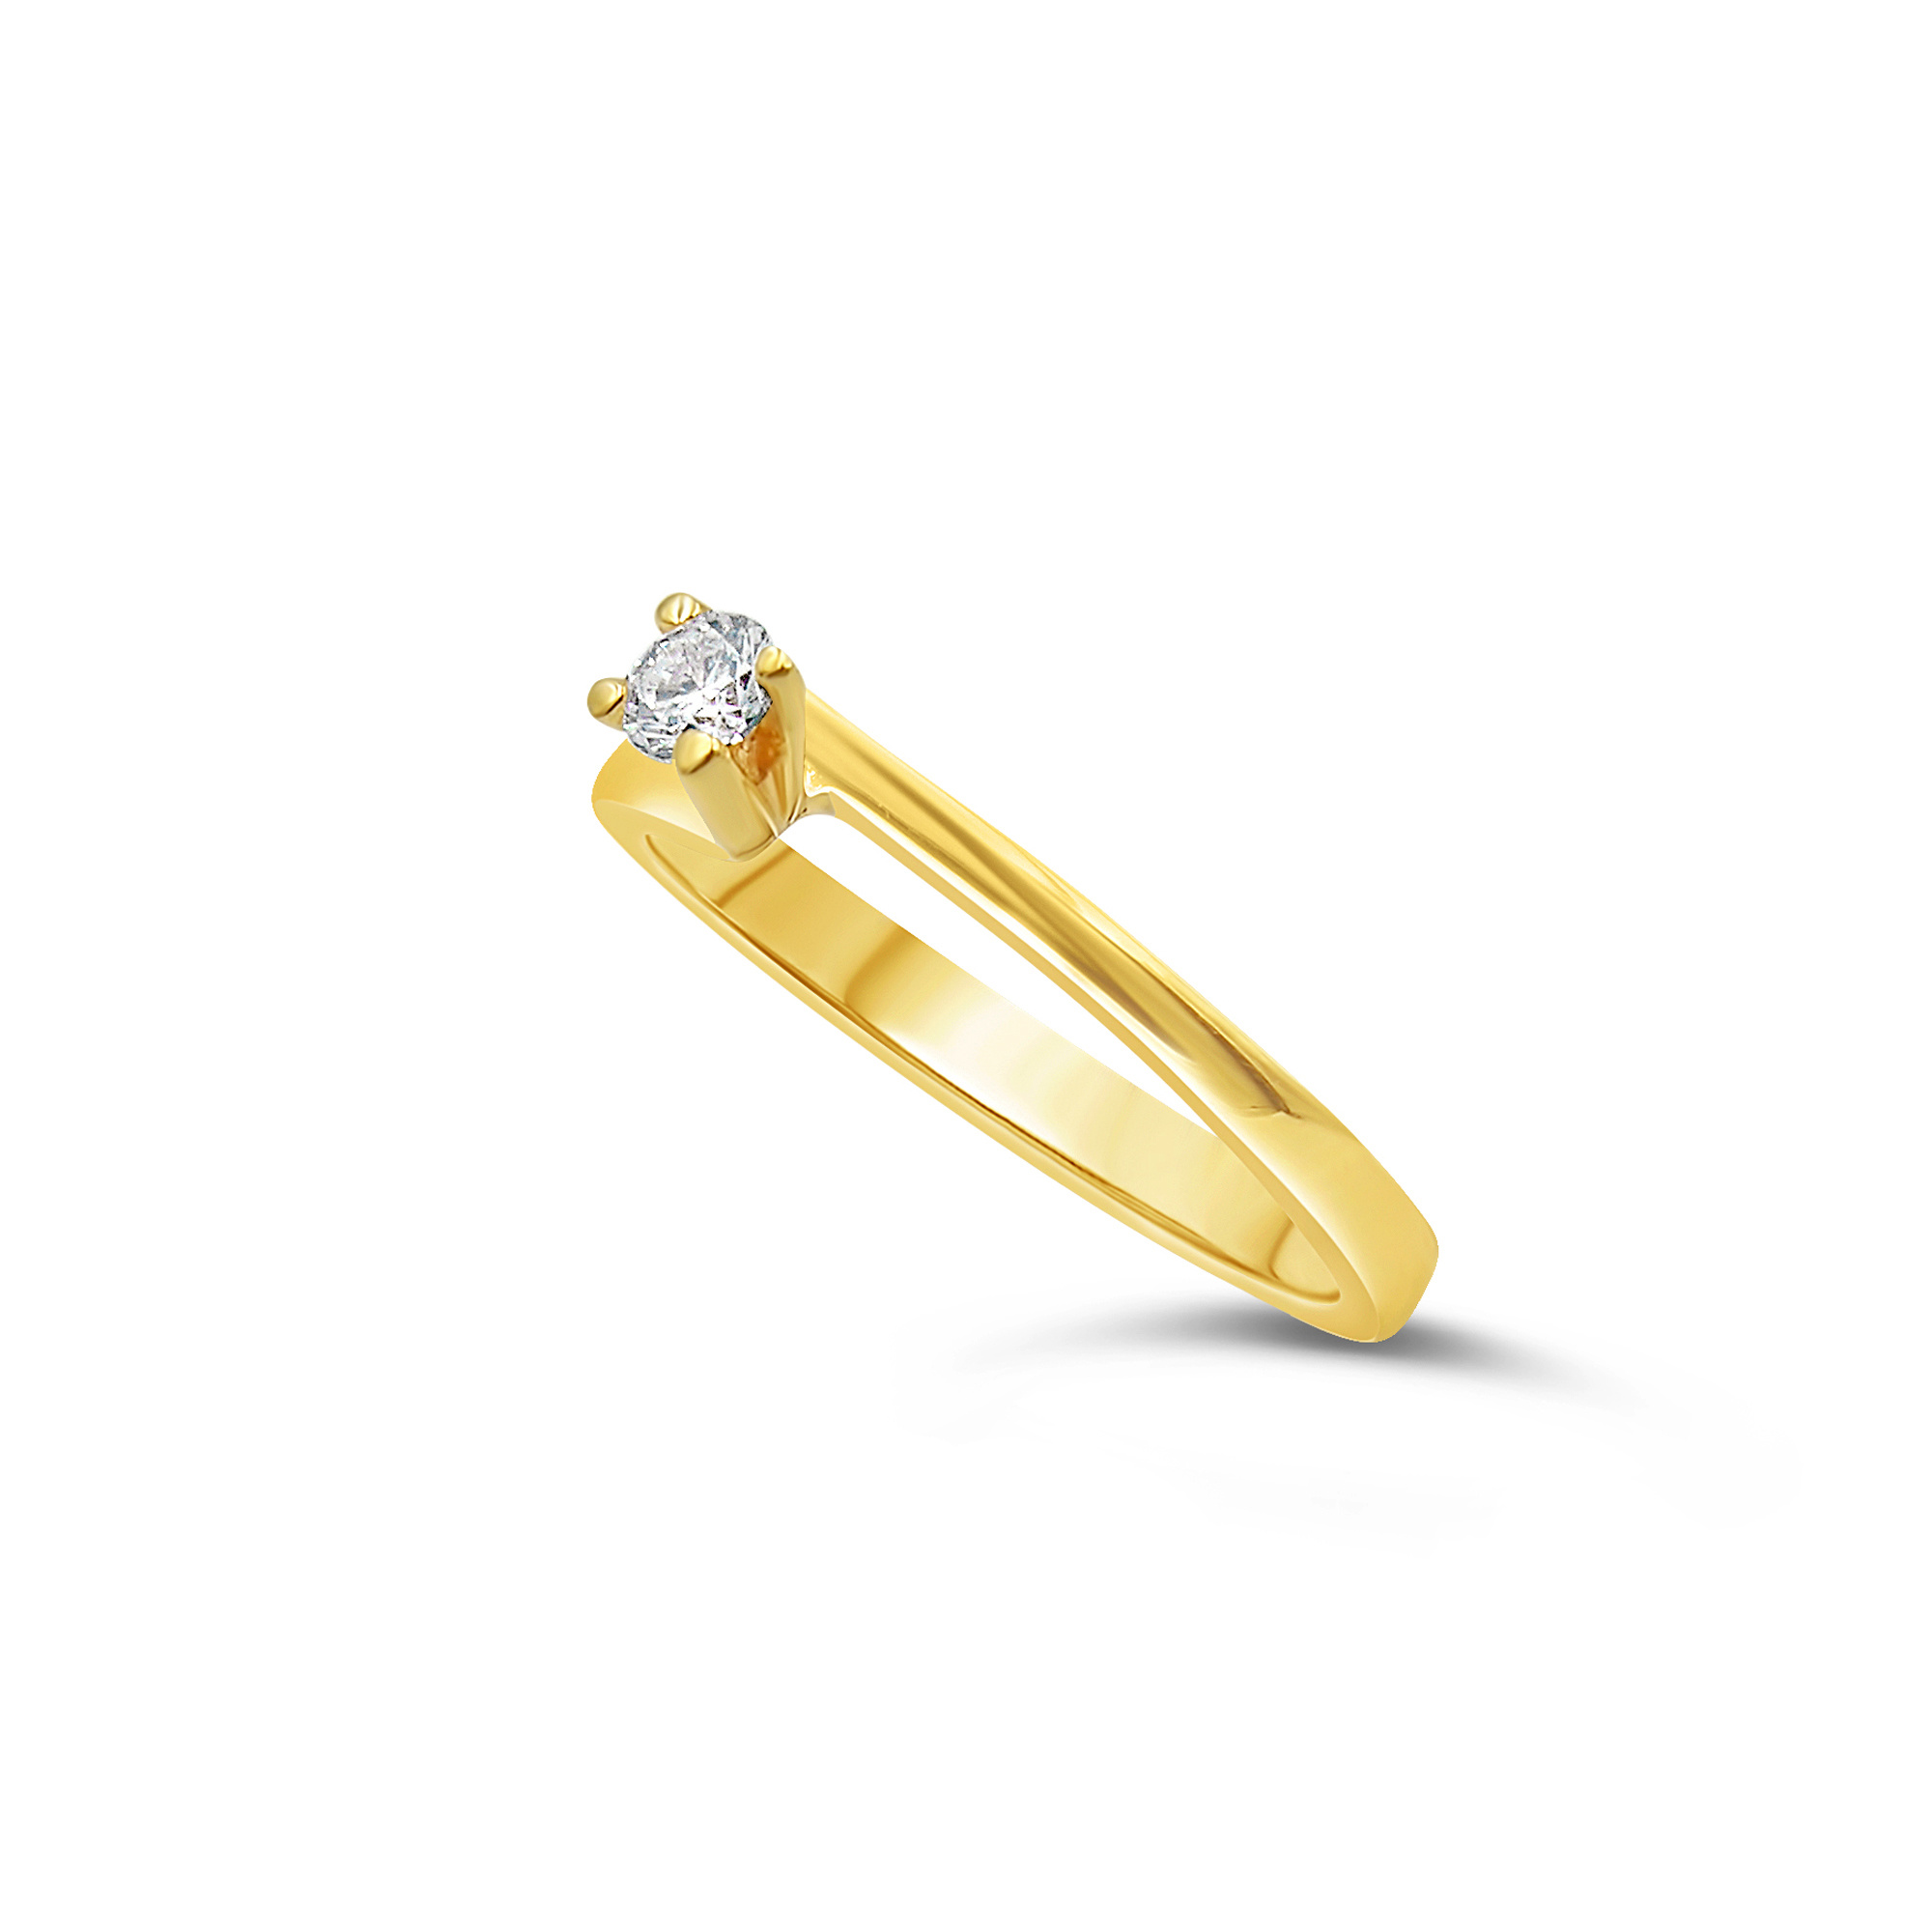 18kt yellow gold engagement ring with 0.18 ct diamond